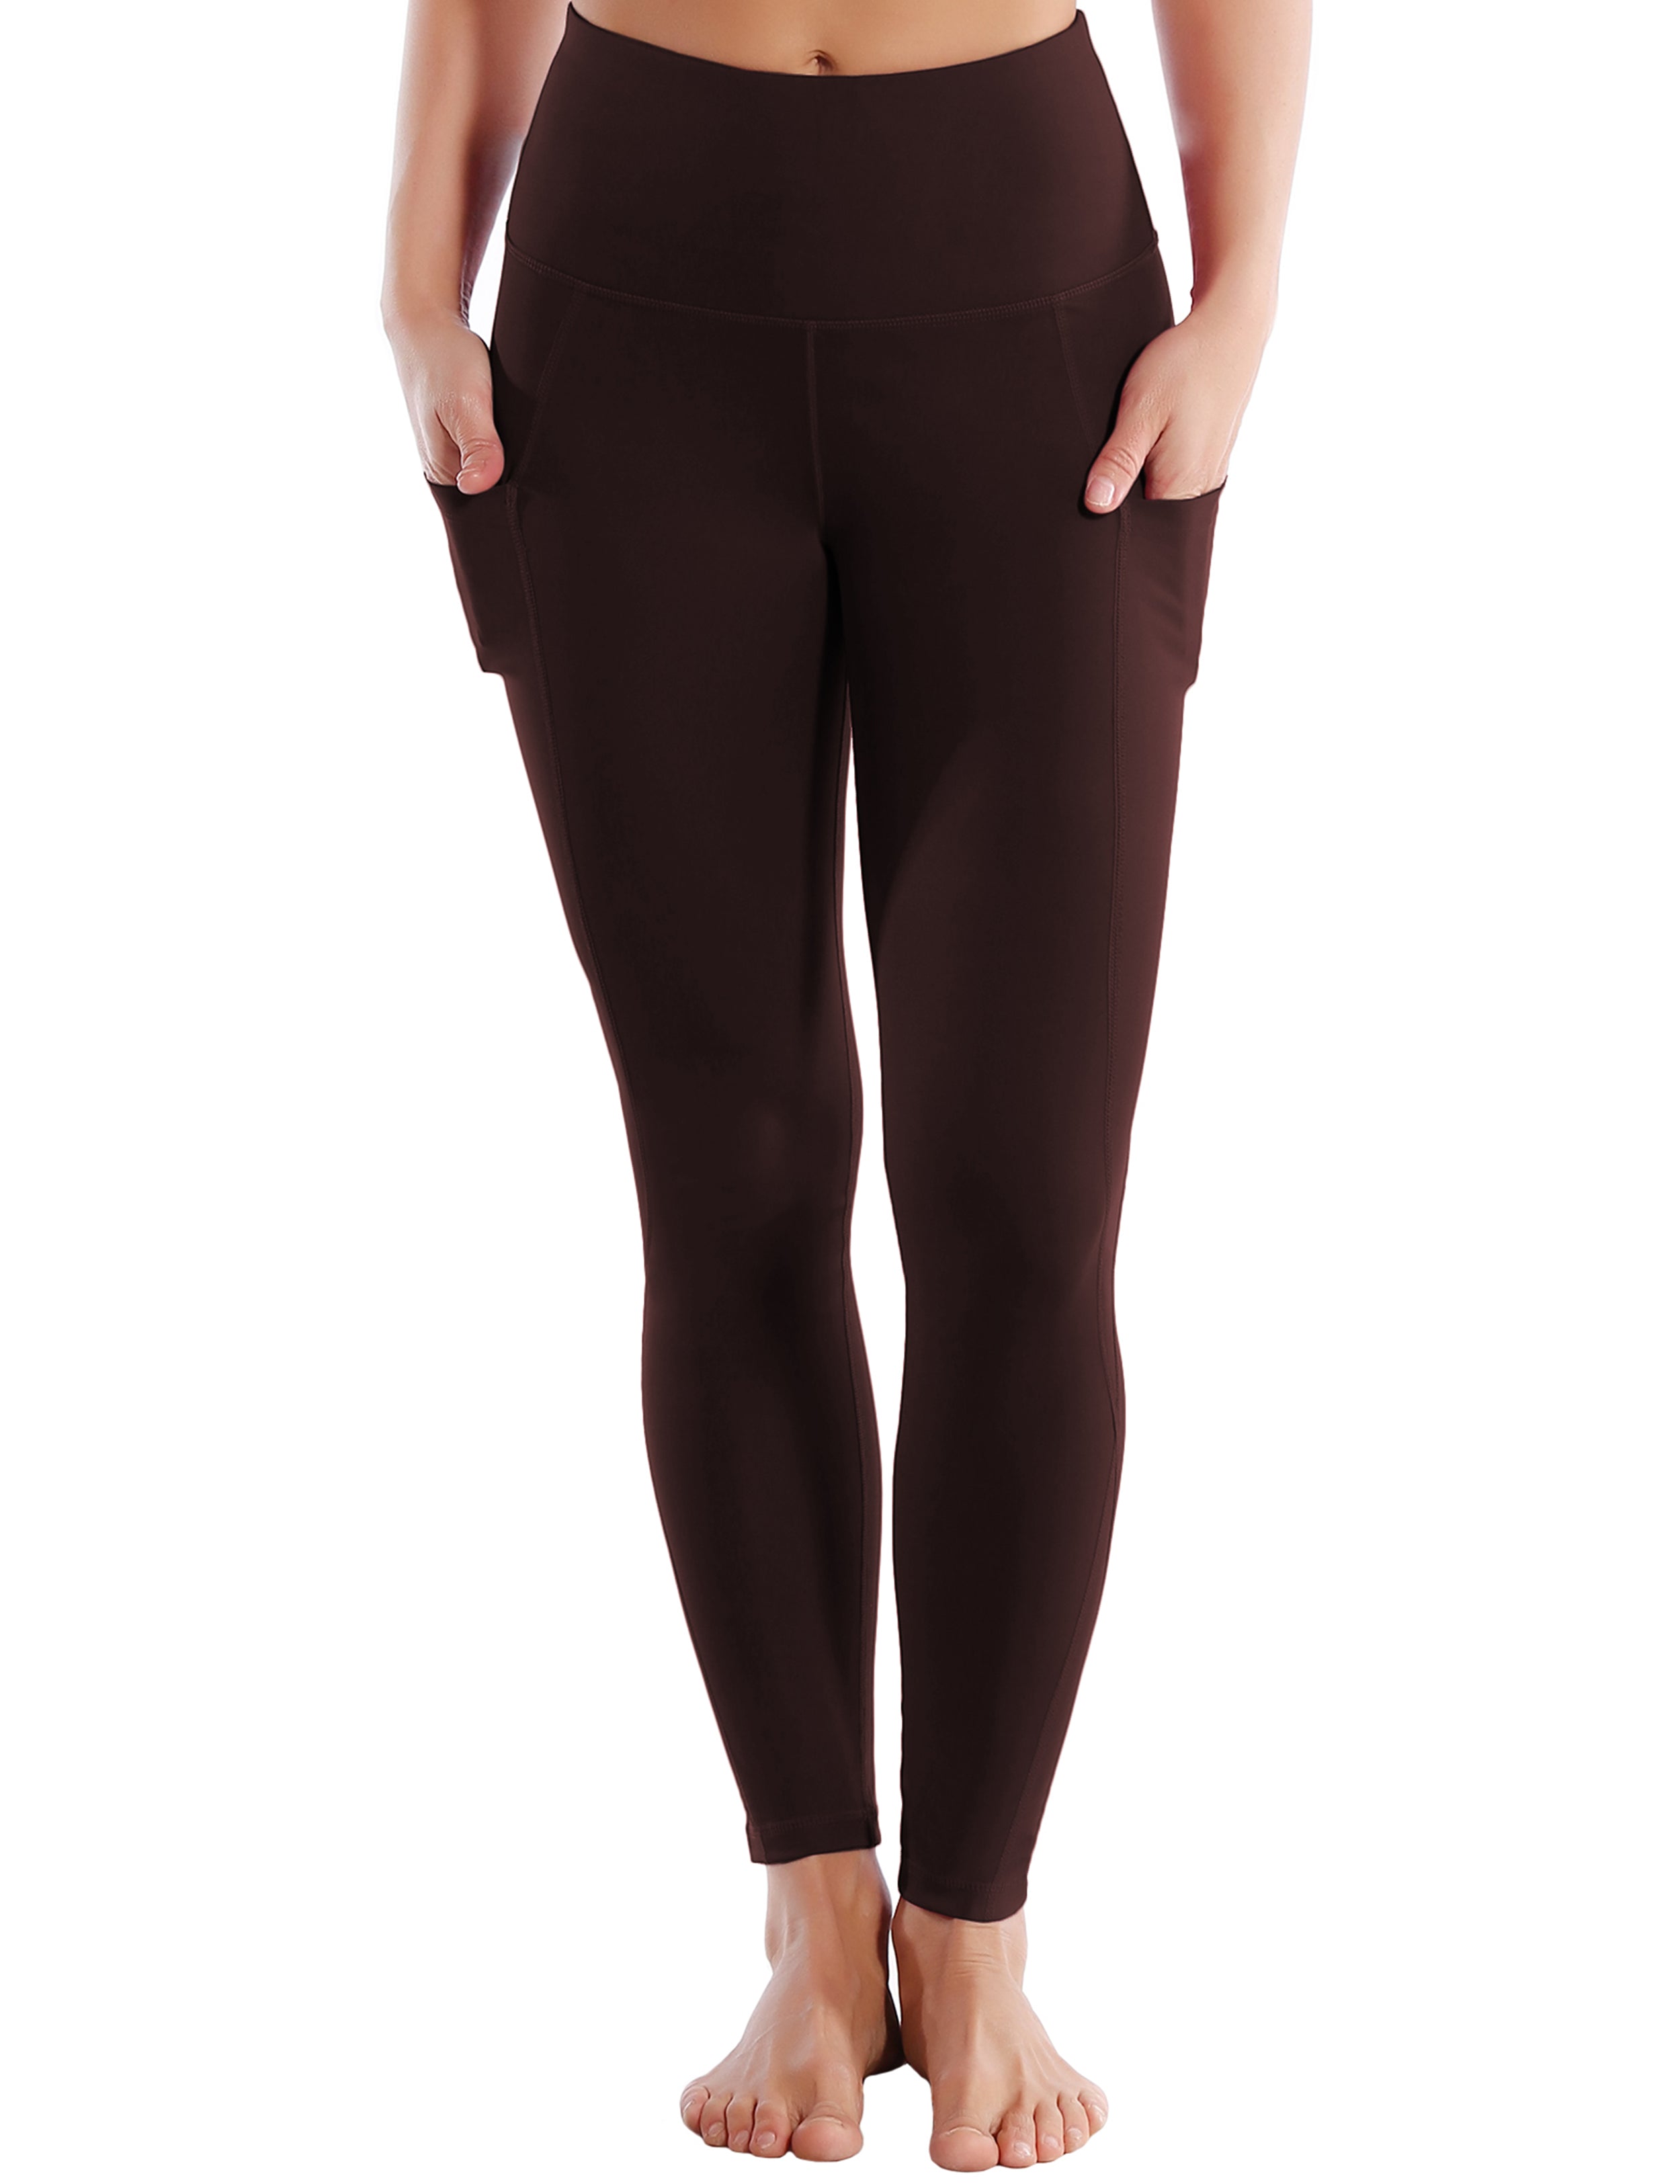 High Waist Side Pockets Golf Pants mahoganymaroon 75% Nylon, 25% Spandex Fabric doesn't attract lint easily 4-way stretch No see-through Moisture-wicking Tummy control Inner pocket